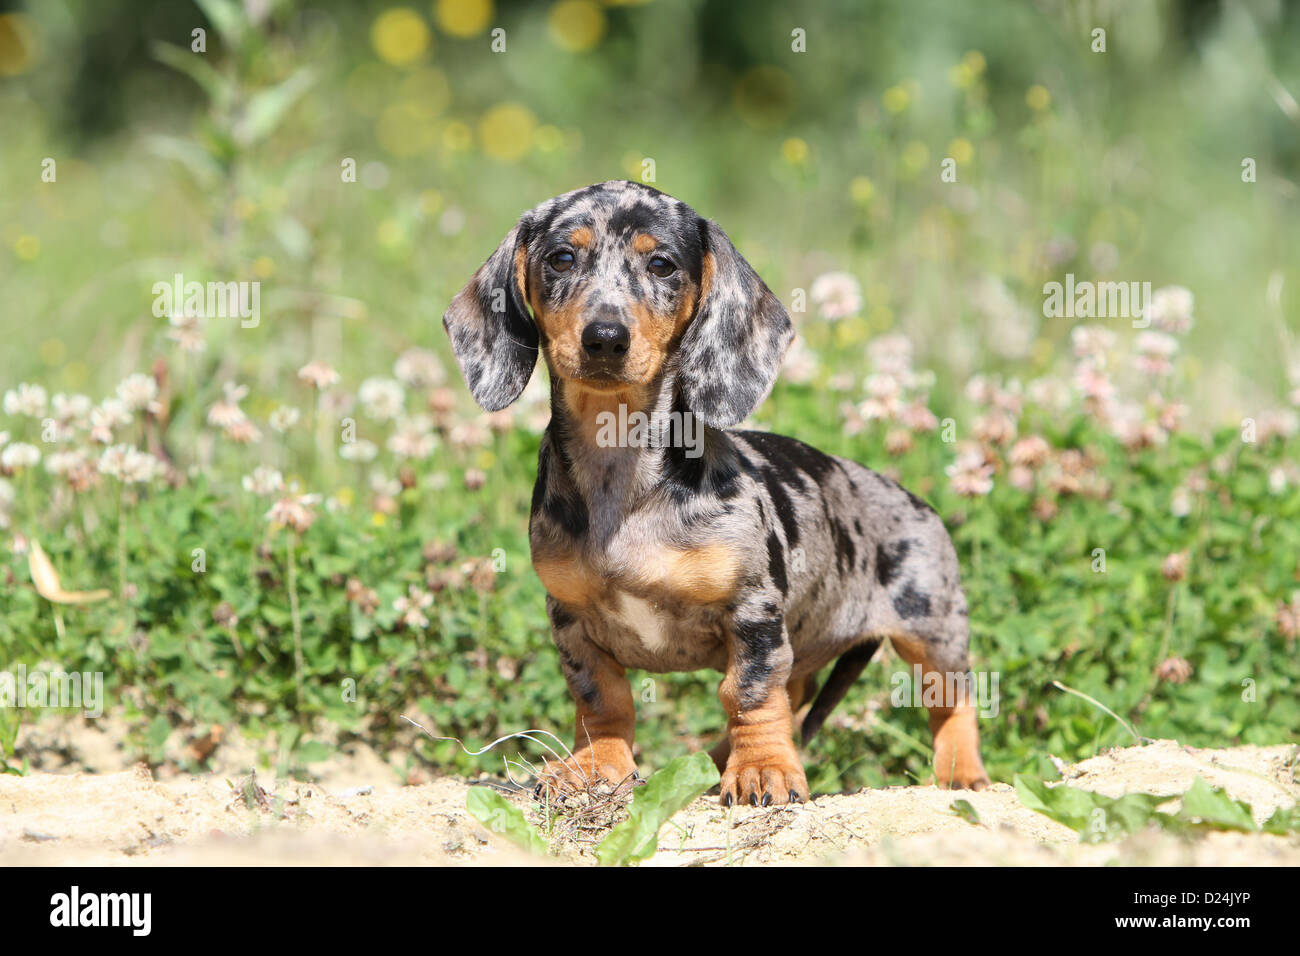 Dog Dachshund / Dackel / Teckel shorthaired puppy (Harlequin Merle)  standing in a meadow Stock Photo - Alamy